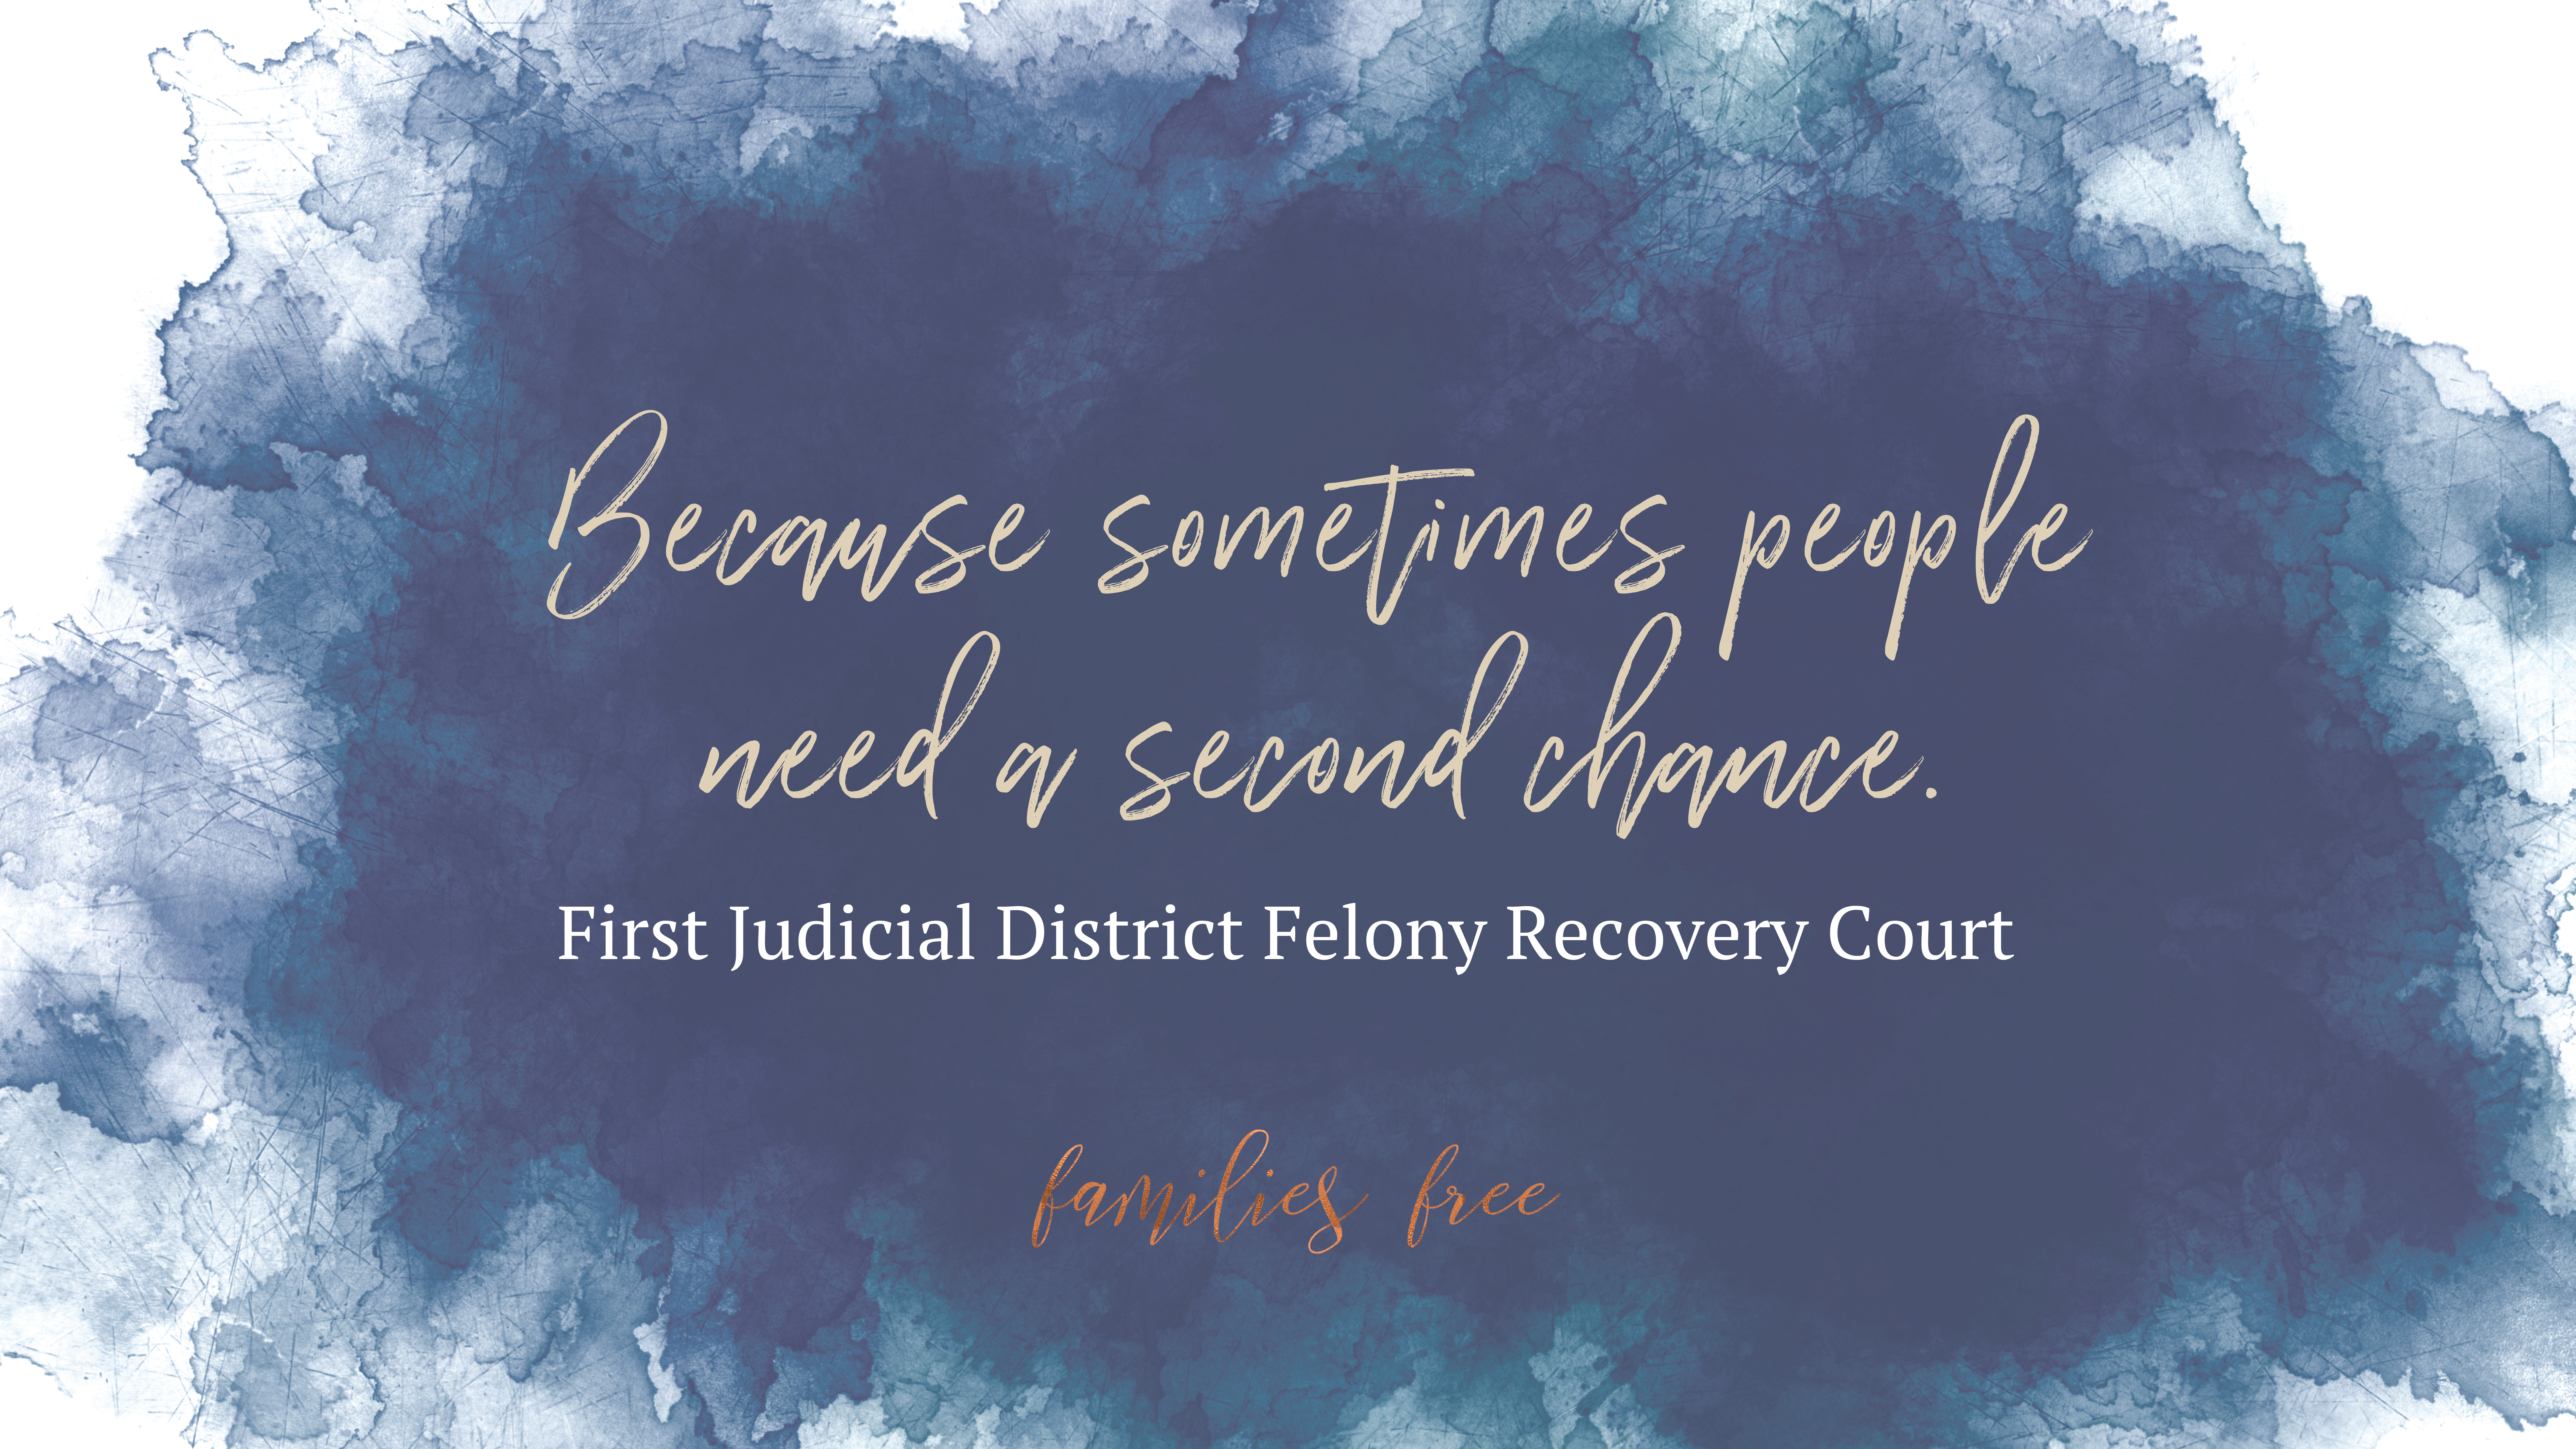 First Judicial District Felony Recovery Court Graduation